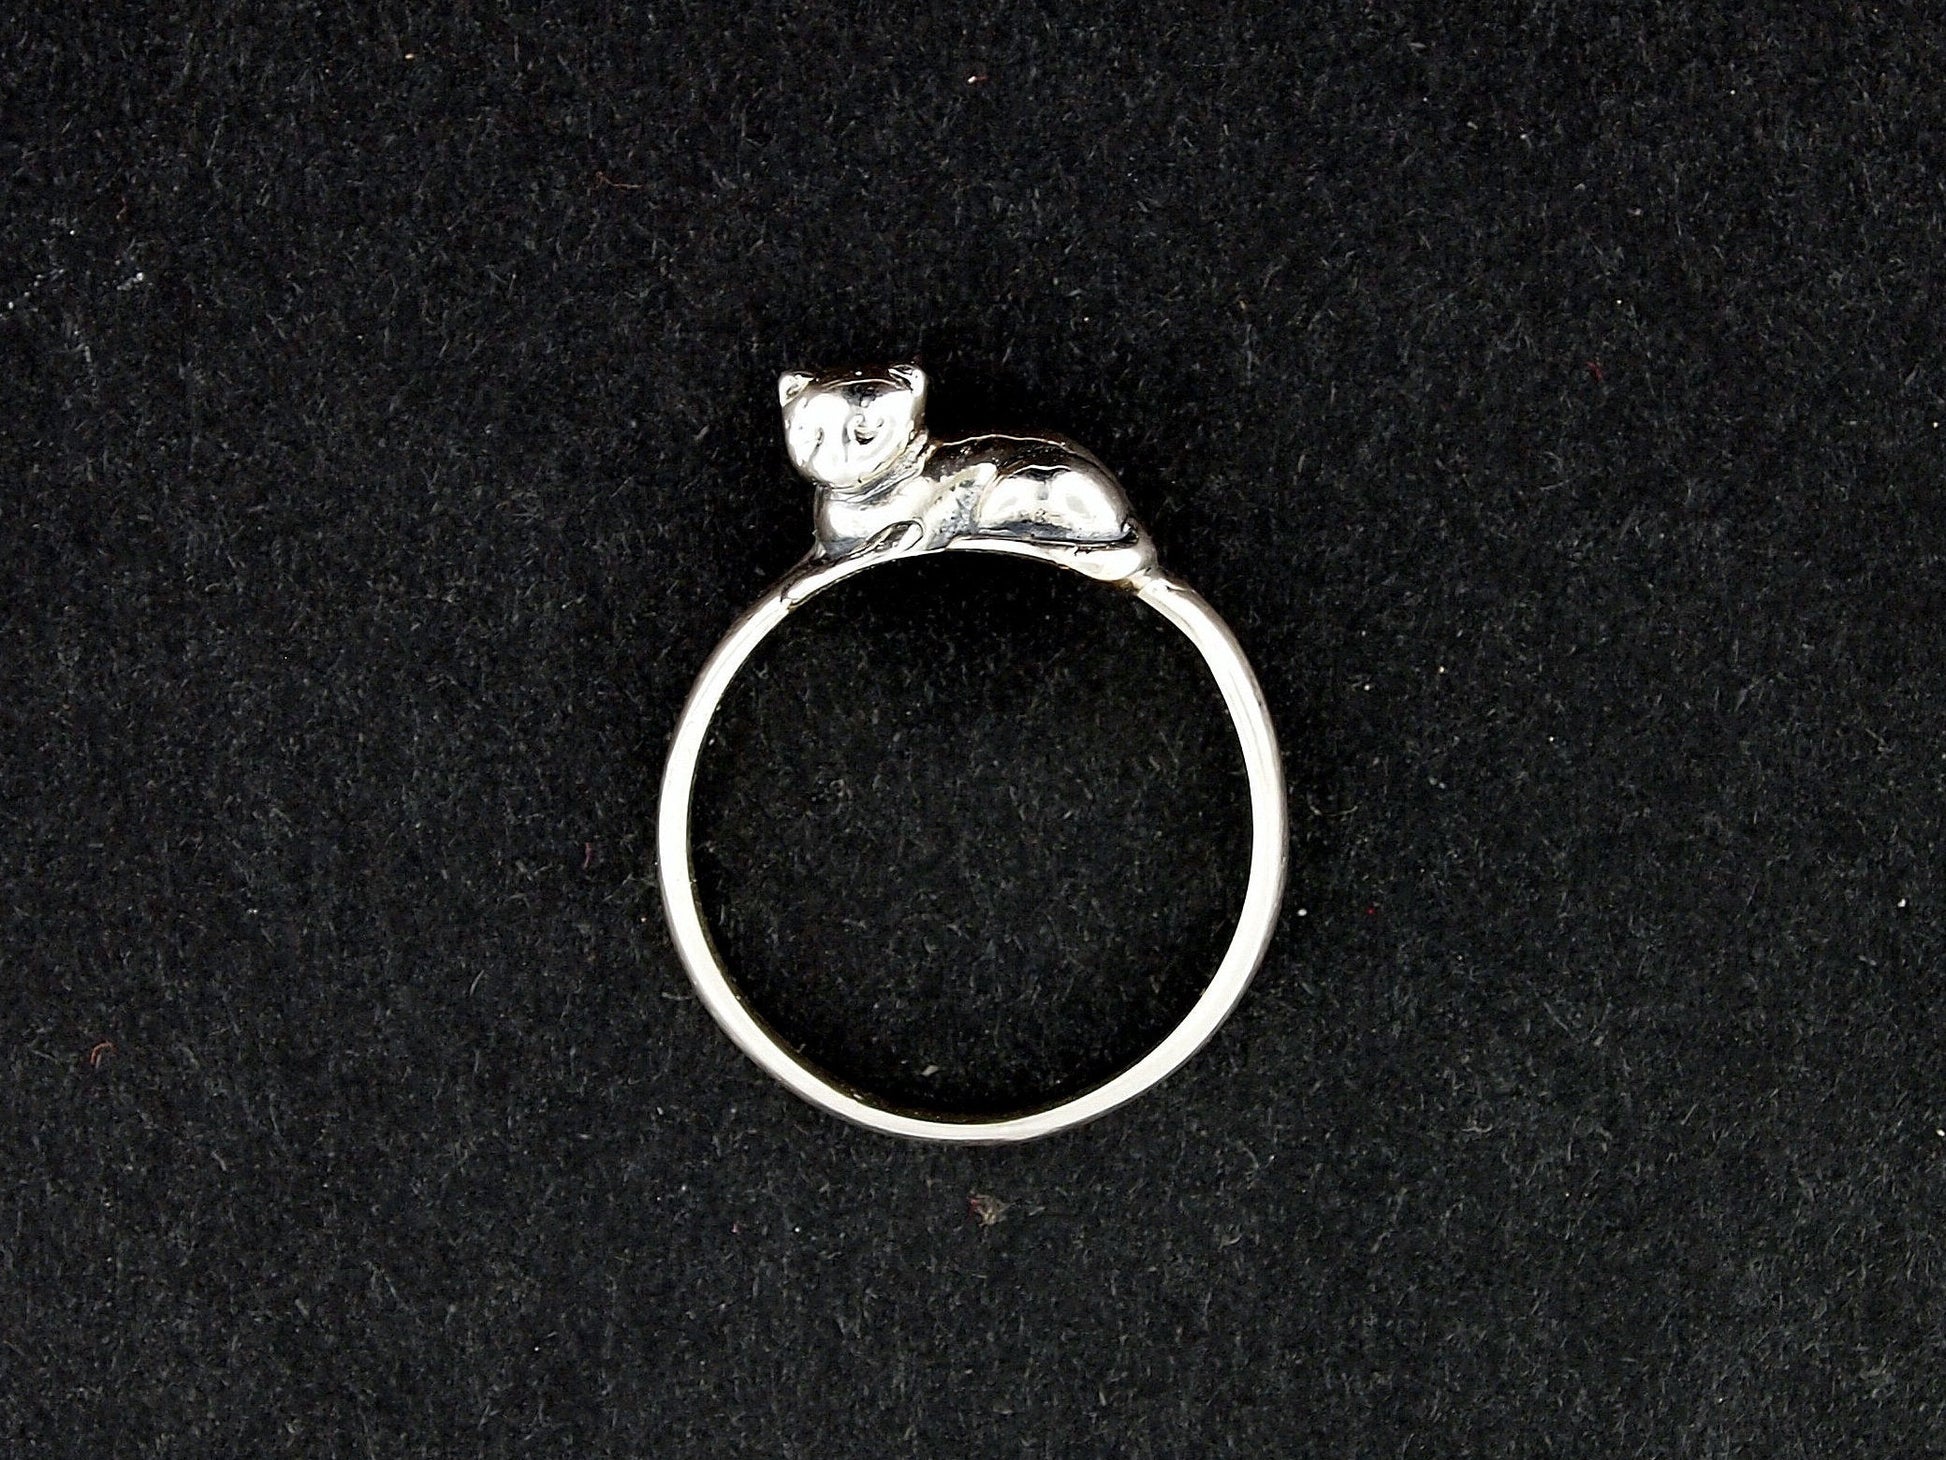 Small 3D Cat Ring in 925 Sterling Silver, Cat Jewelry, Cat Ring Jewellery, Gift For Cat Lover, 925 Silver Cat Jewelry, 925 Cat Jewellery, Silver Cat Ring, Sterling Silver Cat Ring, Silver Cat Jewellery, Cat Lover Ring, Cat Lover Jewellery